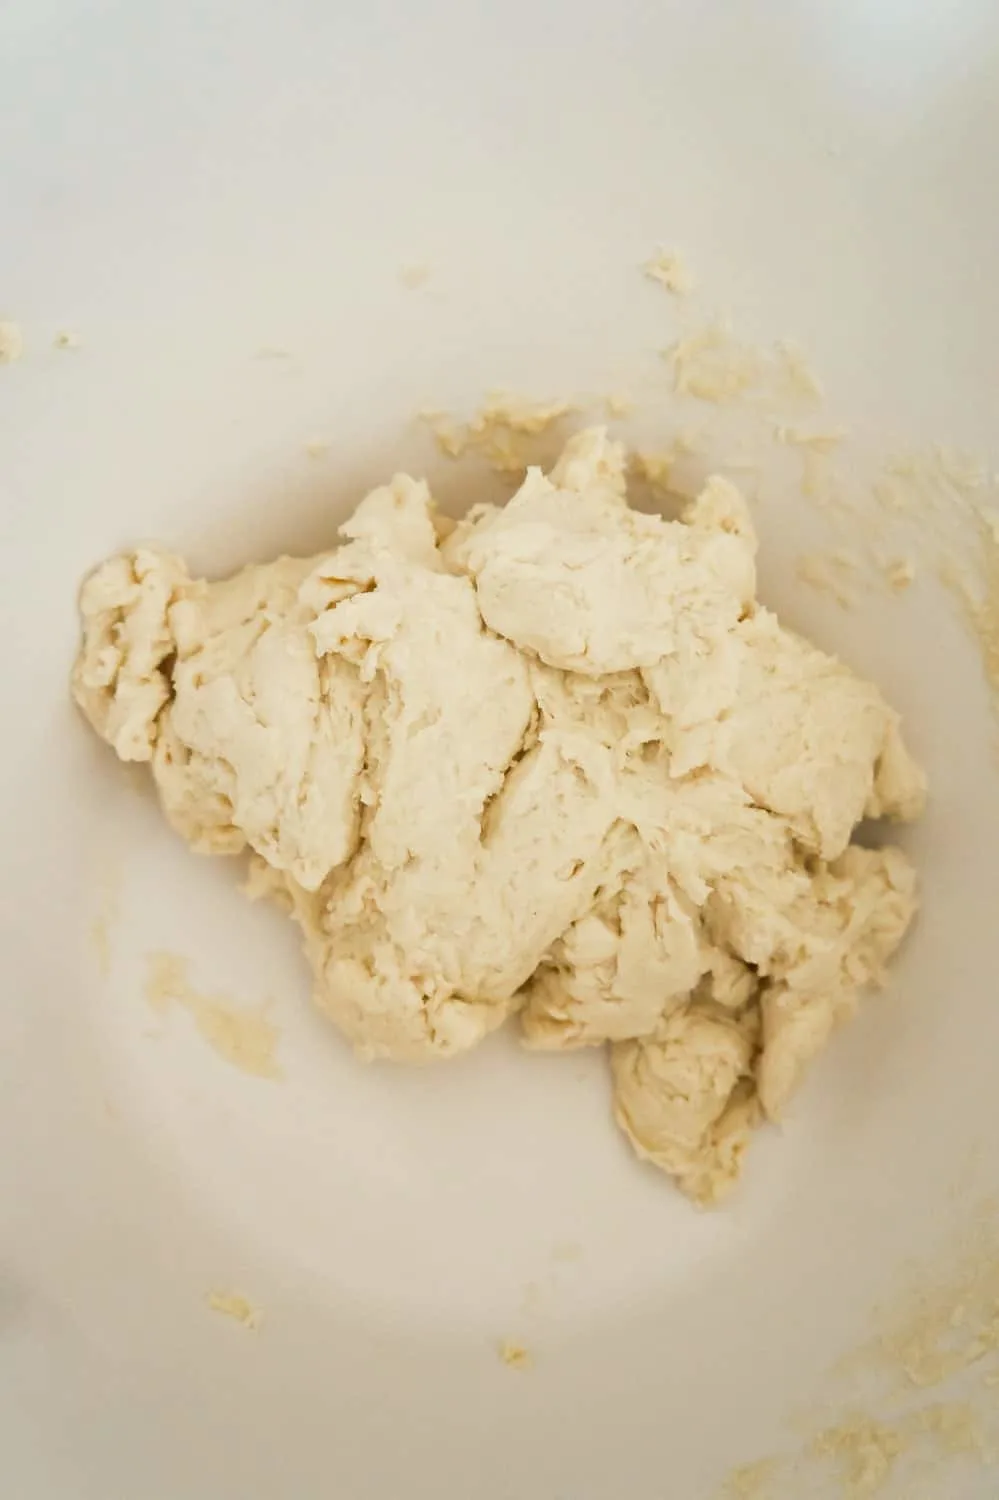 Bisquick dough in a mixing bowl